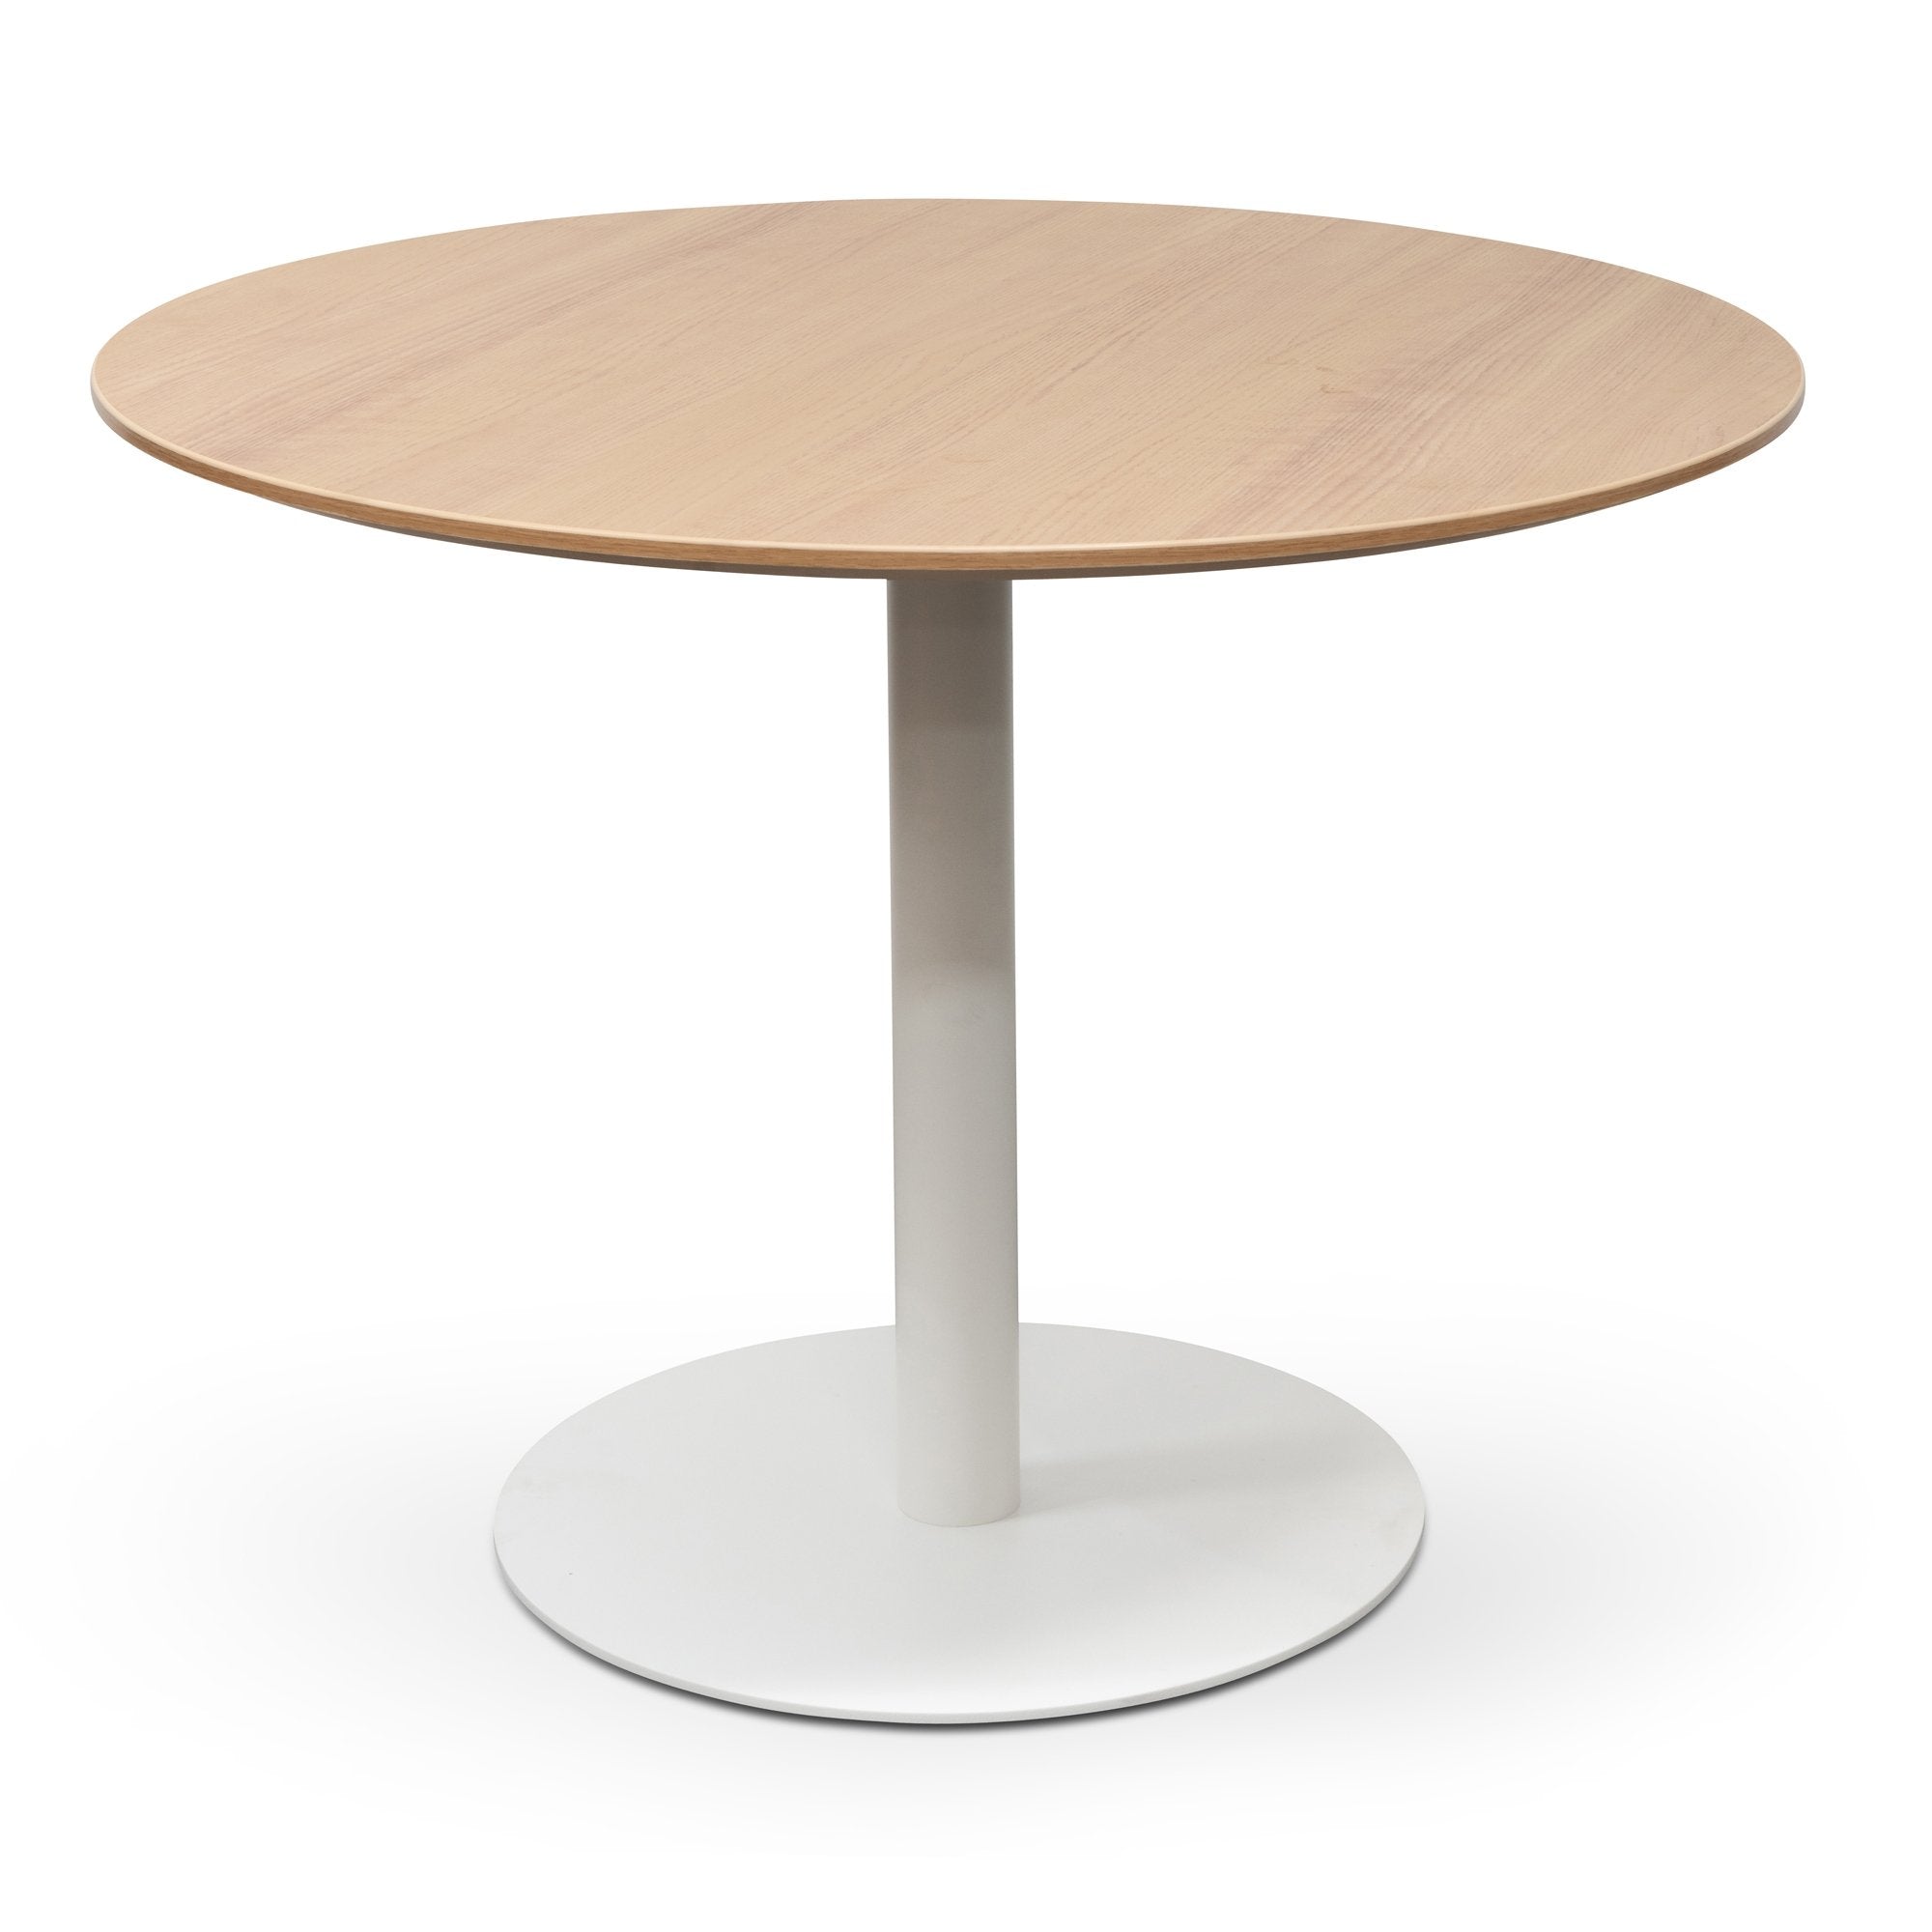 Baxter - Round Office Meeting Table - Natural